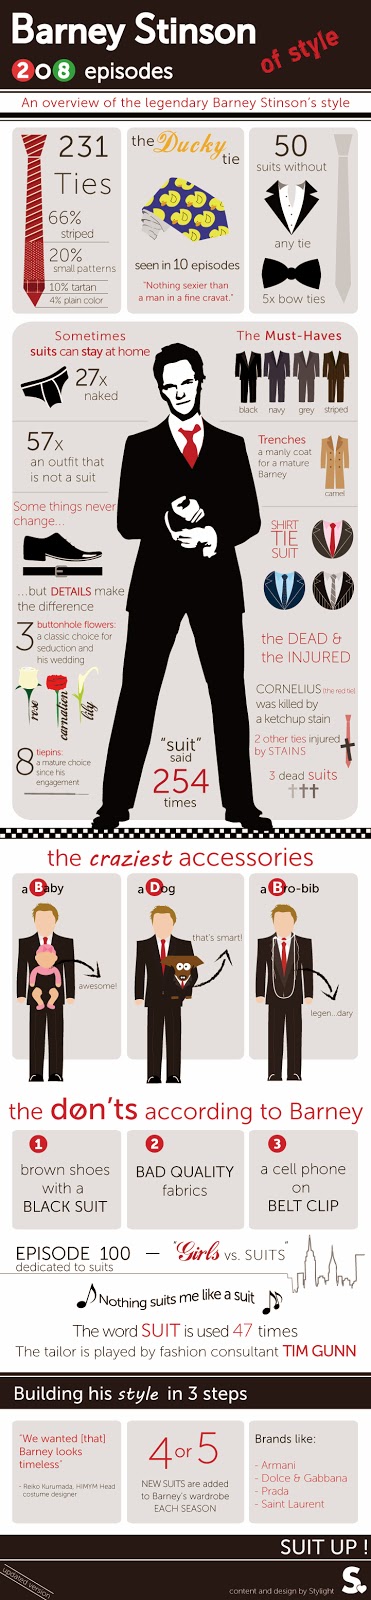 How to Suit Up Like Barney Stinson